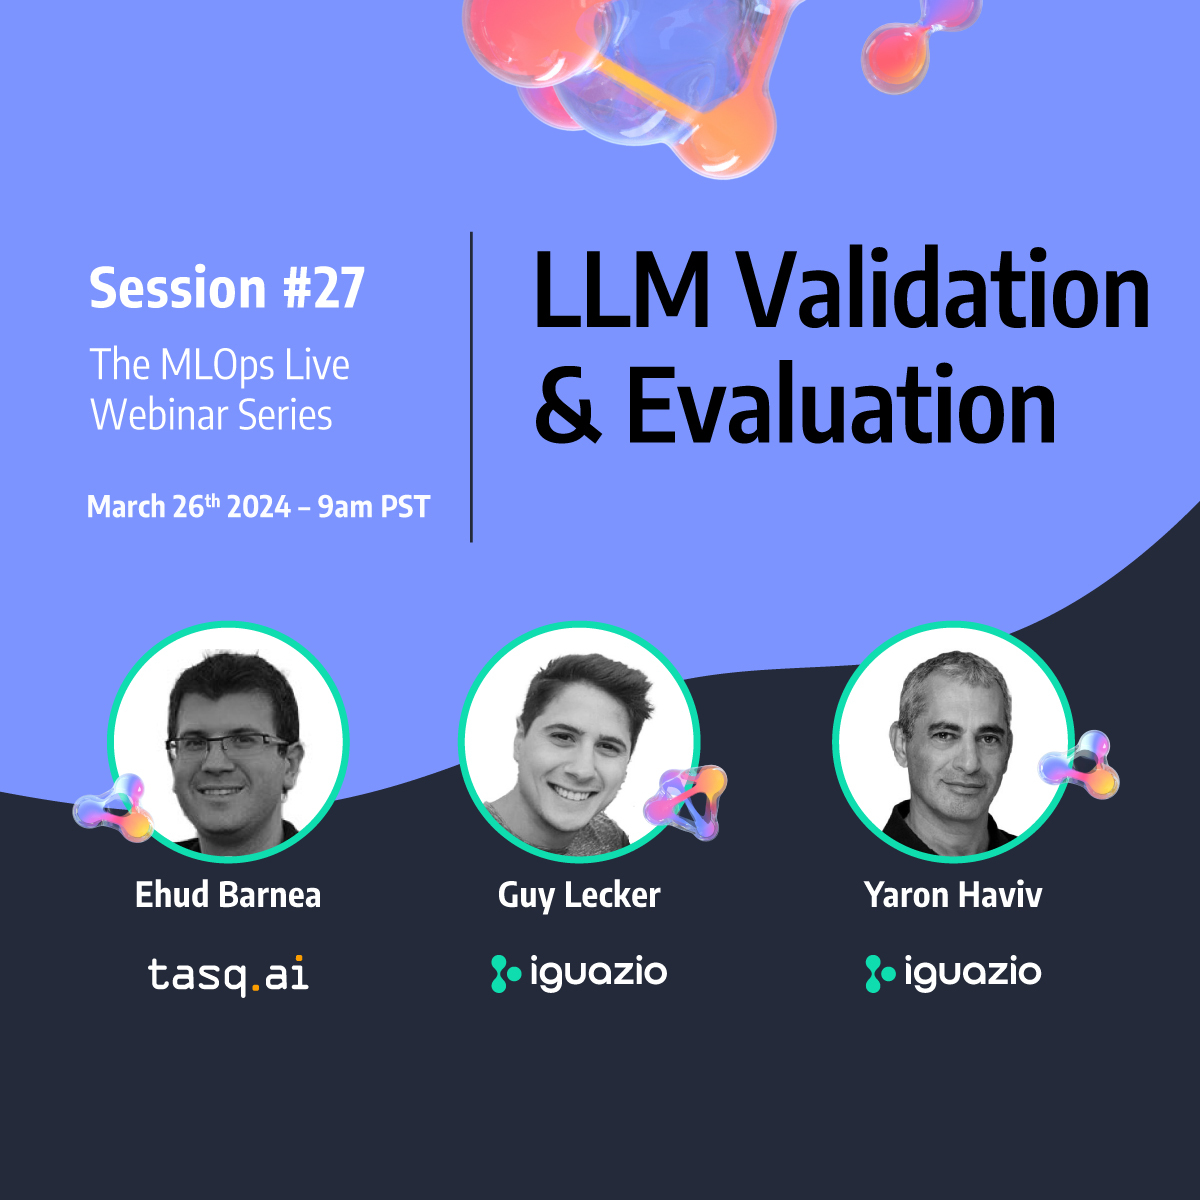 Registration is open for for MLOps Live #27 with @tasq_ai! 🥳🍾🪩🎉 Get ready to deep into the world of #LLM Validation & Evaluation with leading experts in the field. Sign up today to save your seat: go.iguazio.com/llm-validation…